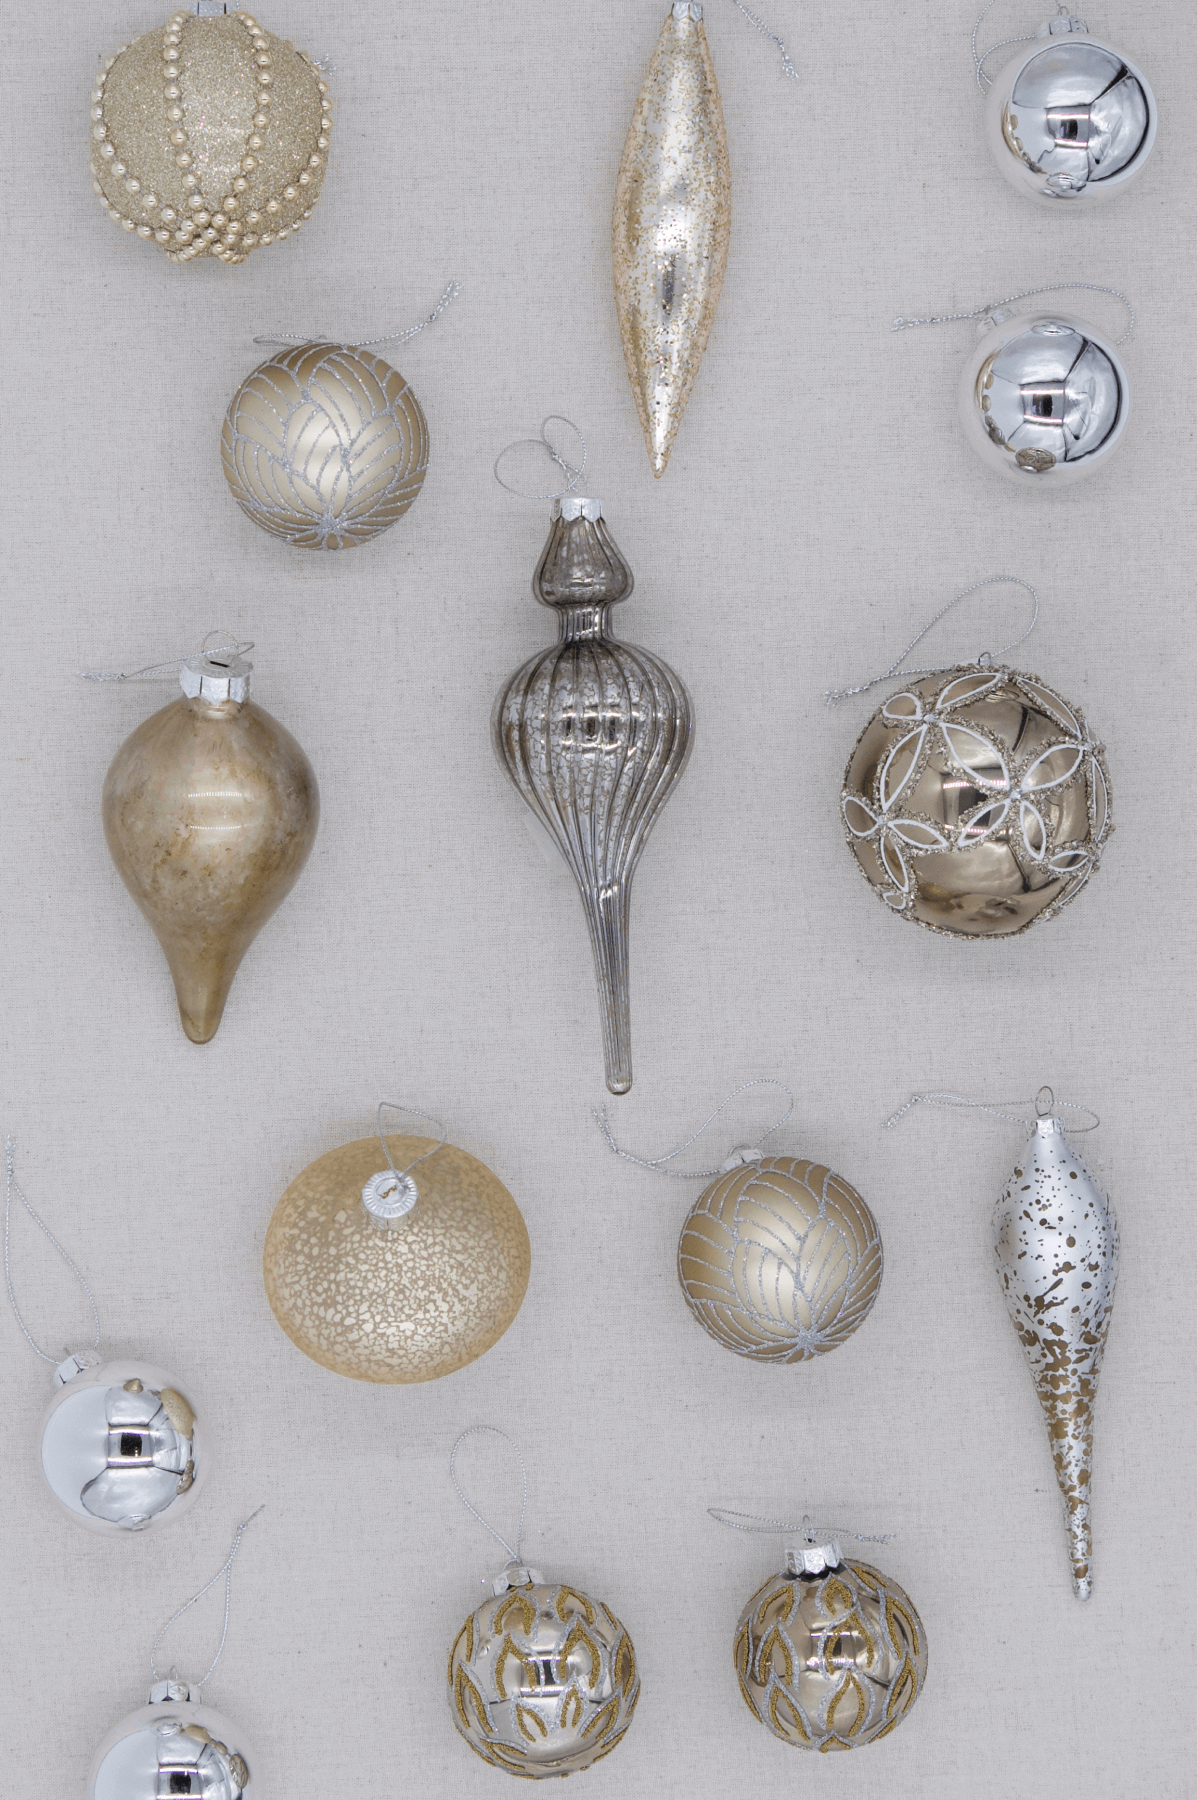 King of Christmas Mixed Metals 15-Piece Glass Ornament Set (Silver-Gold)